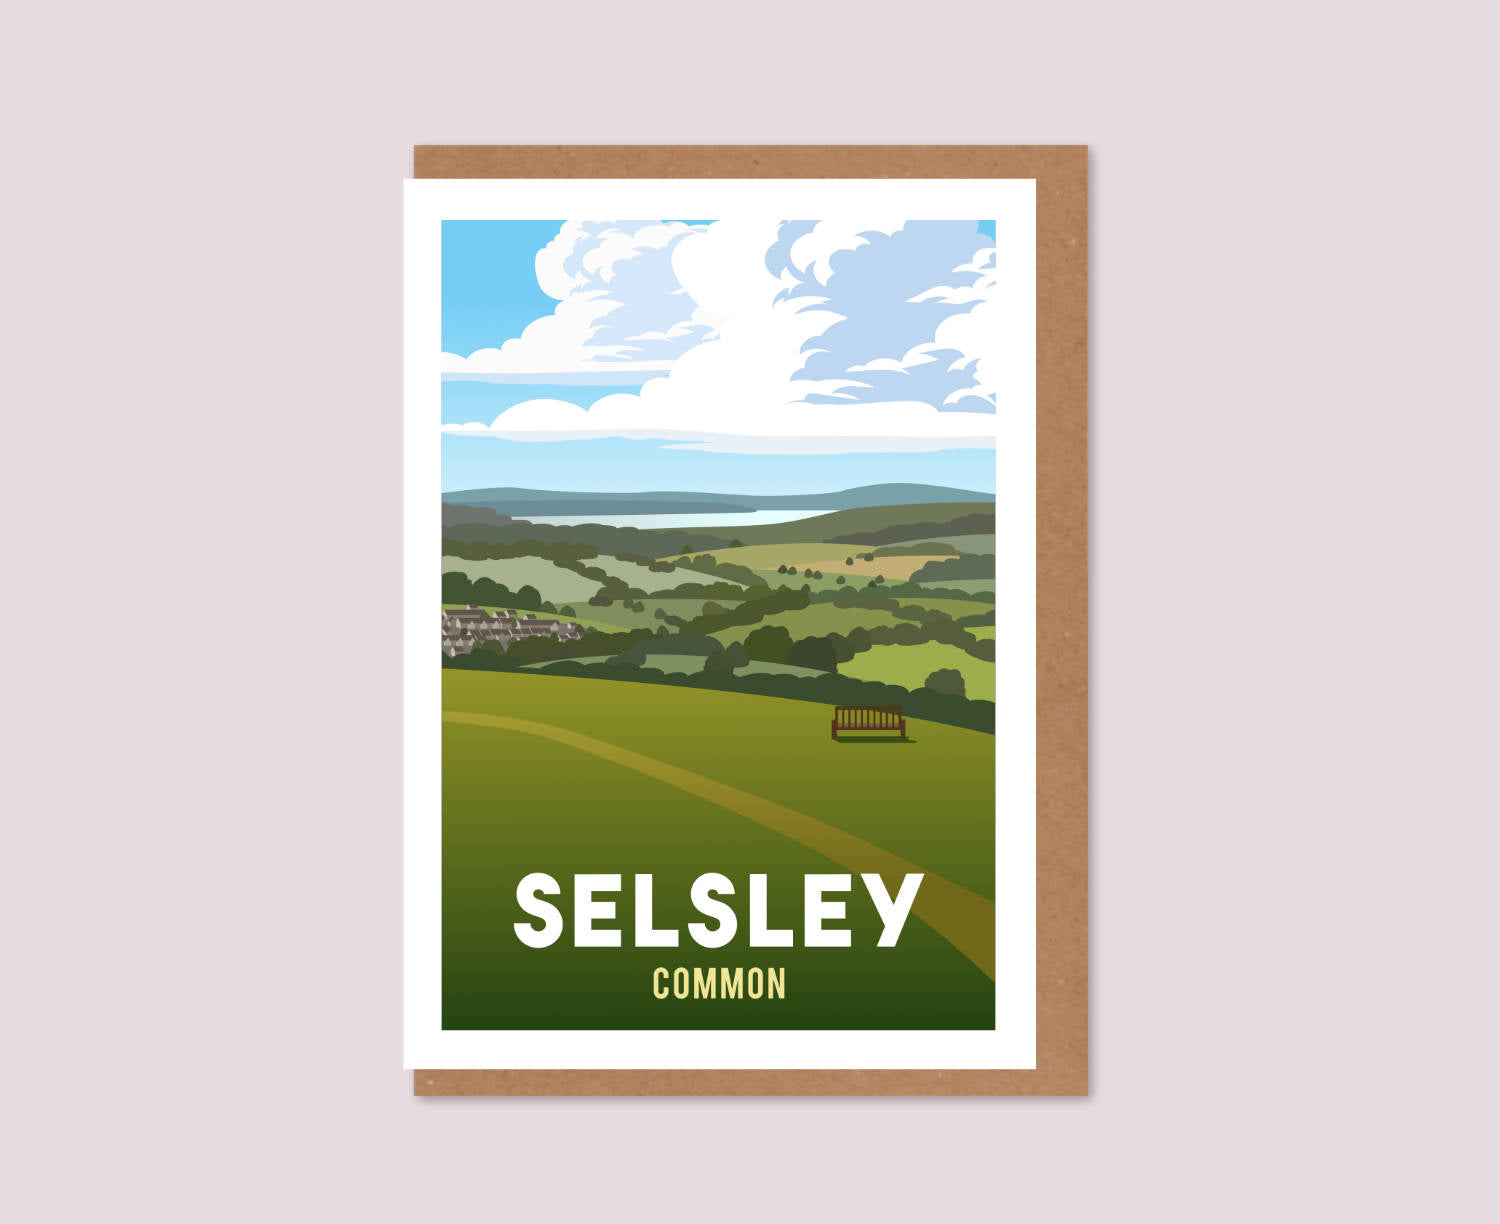 Selsley Common Greeting Card design